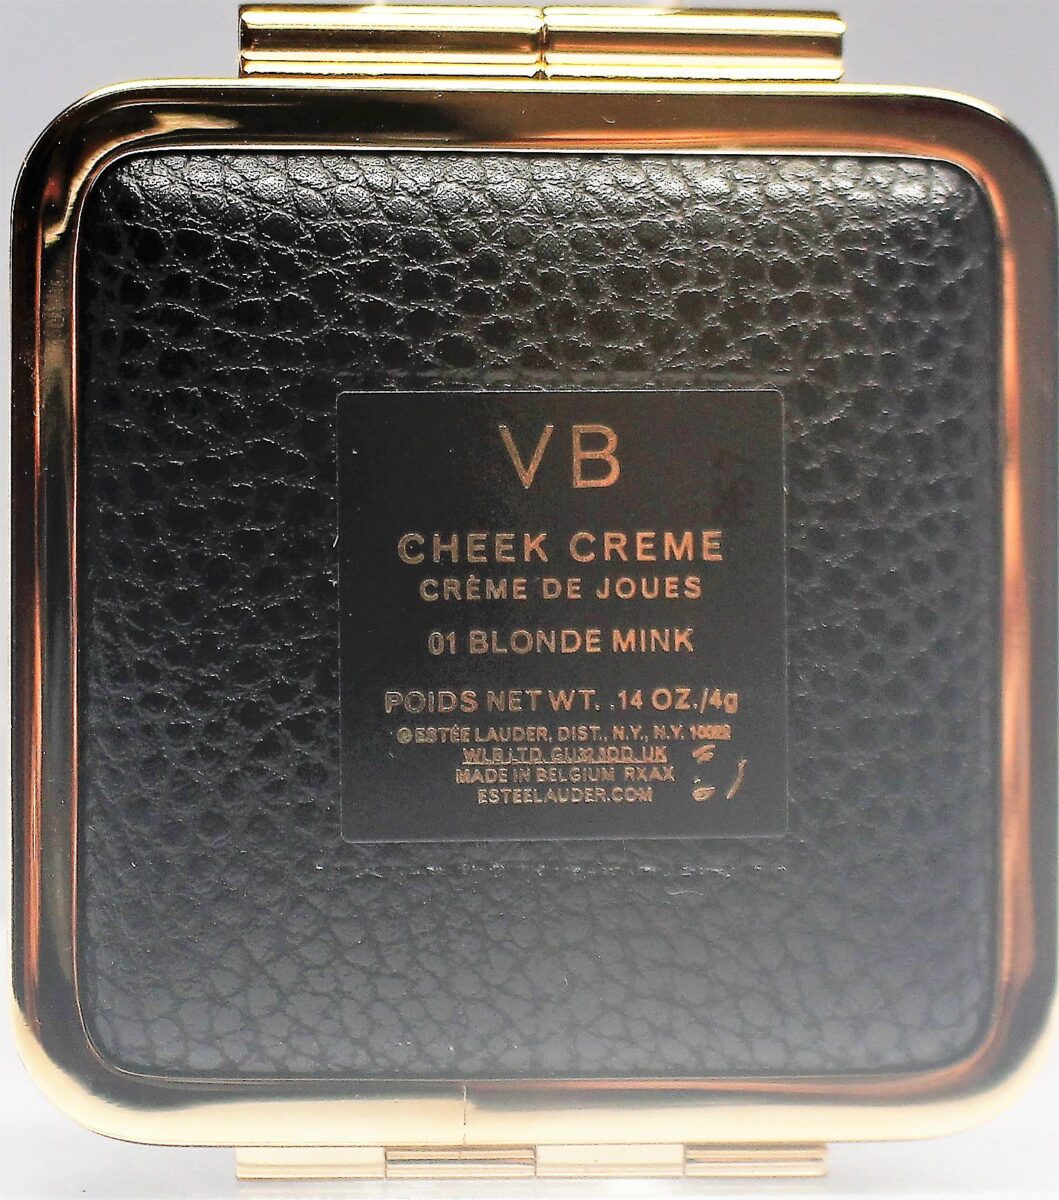 the back of the compact has the initials VB and the color of the creme blush - blonde mink